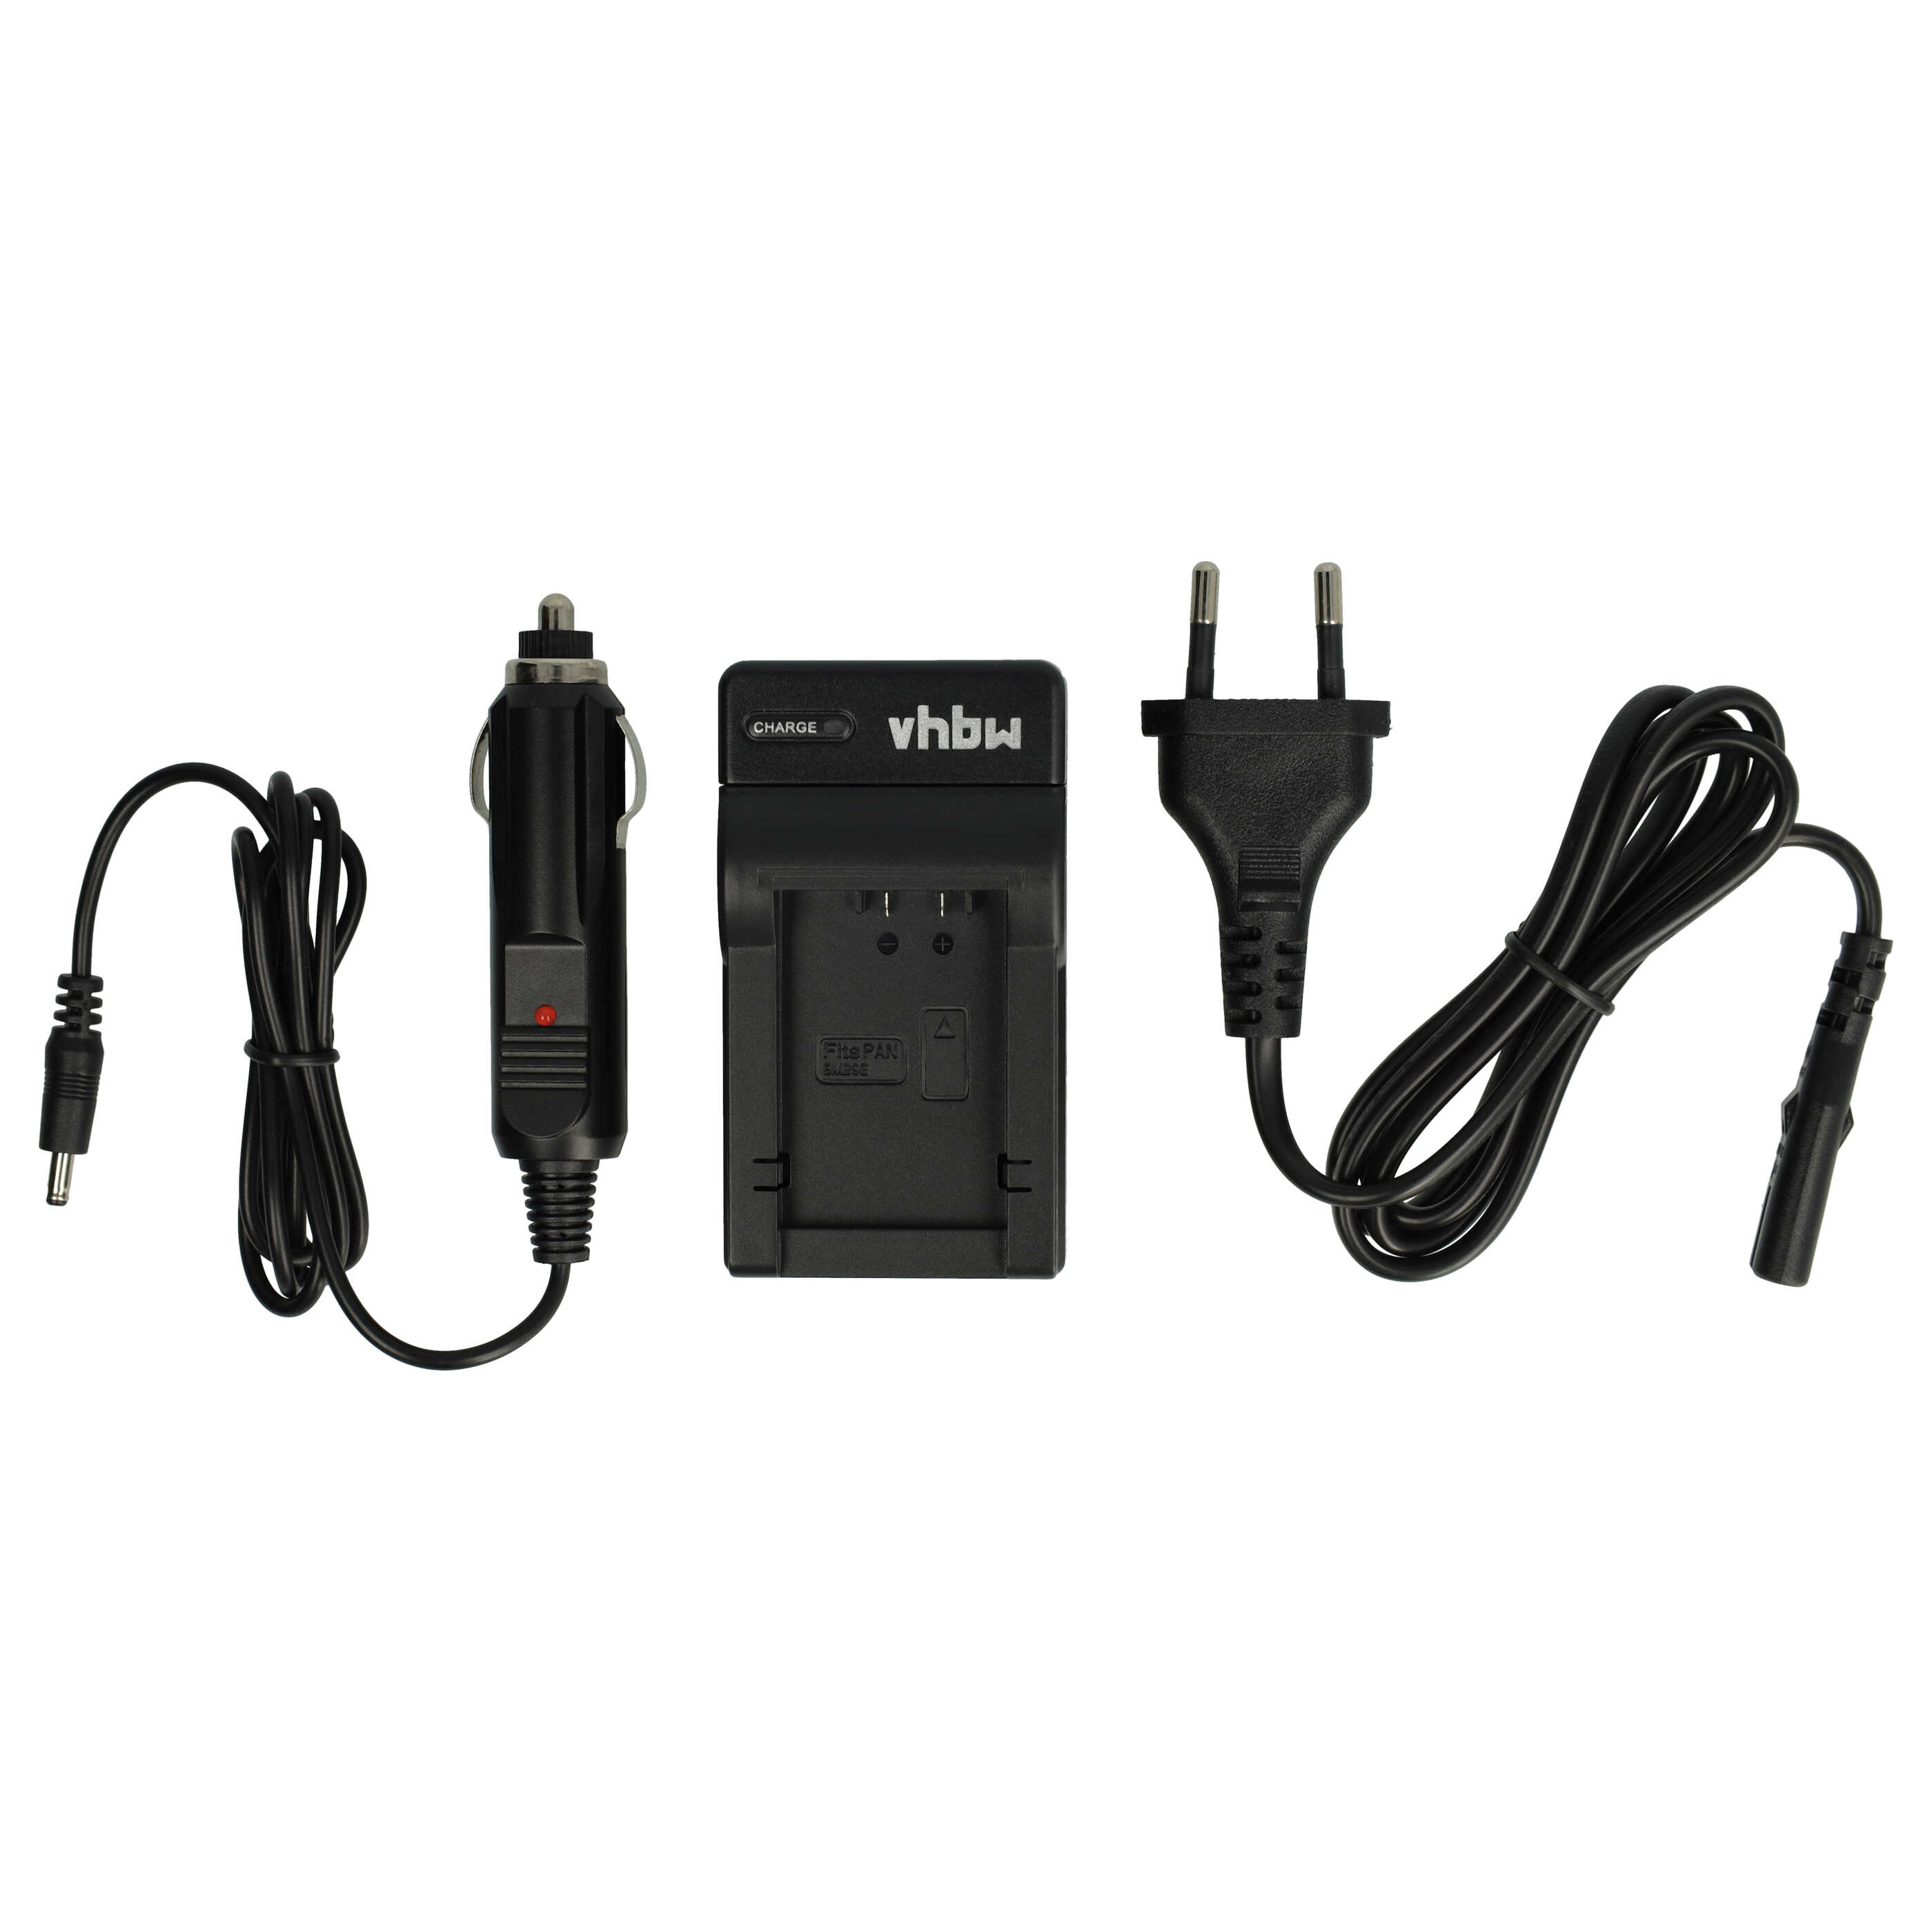 Battery Charger suitable for V-Lux DMC-FZ100 Camera etc. - 0.6 A, 8.4 V